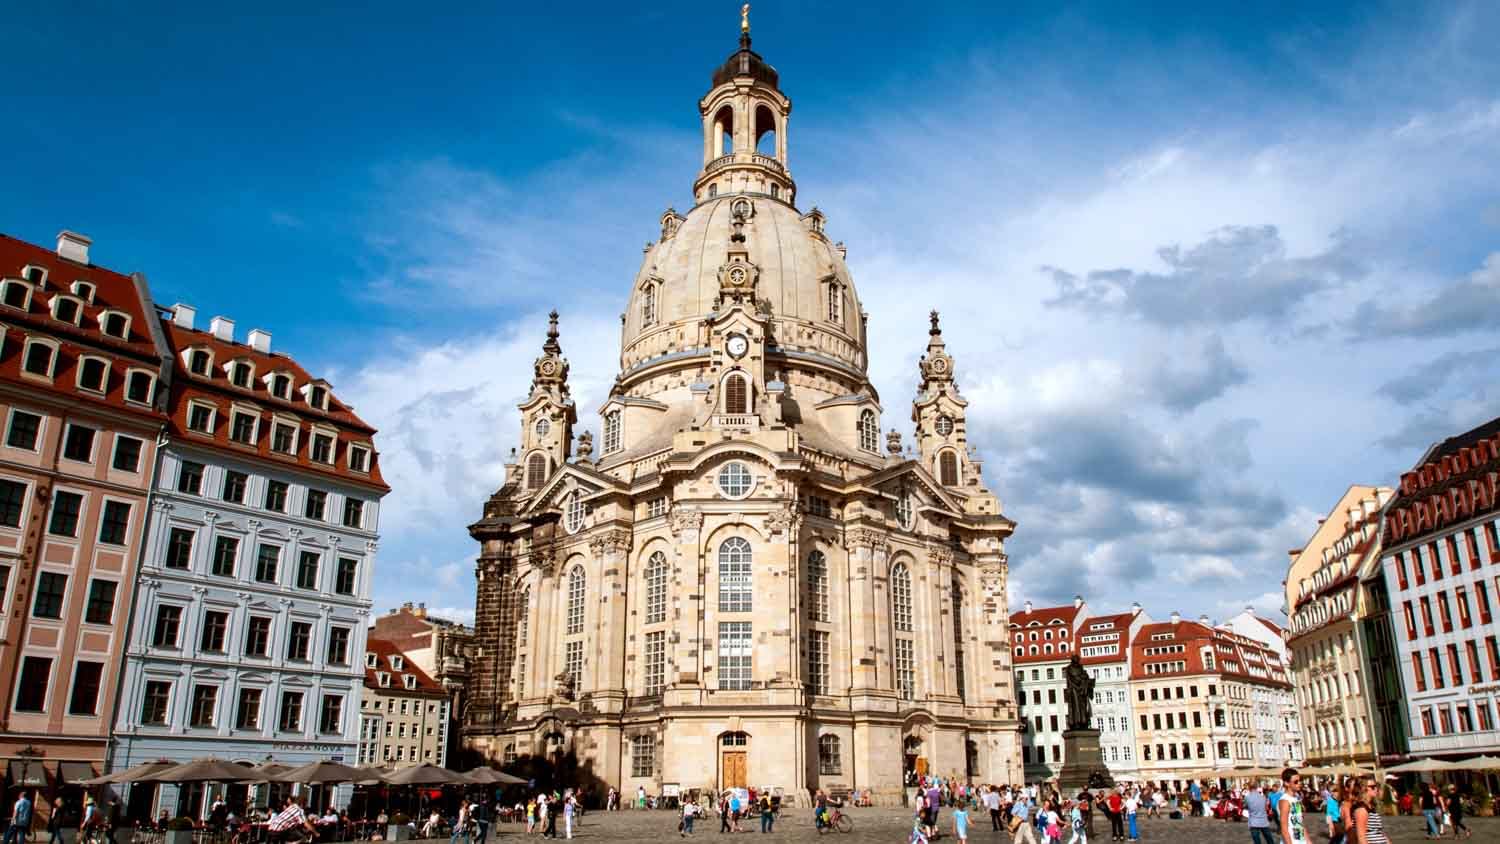 Front Image Of The Frauenkirche Dresden In Dresden, Germany